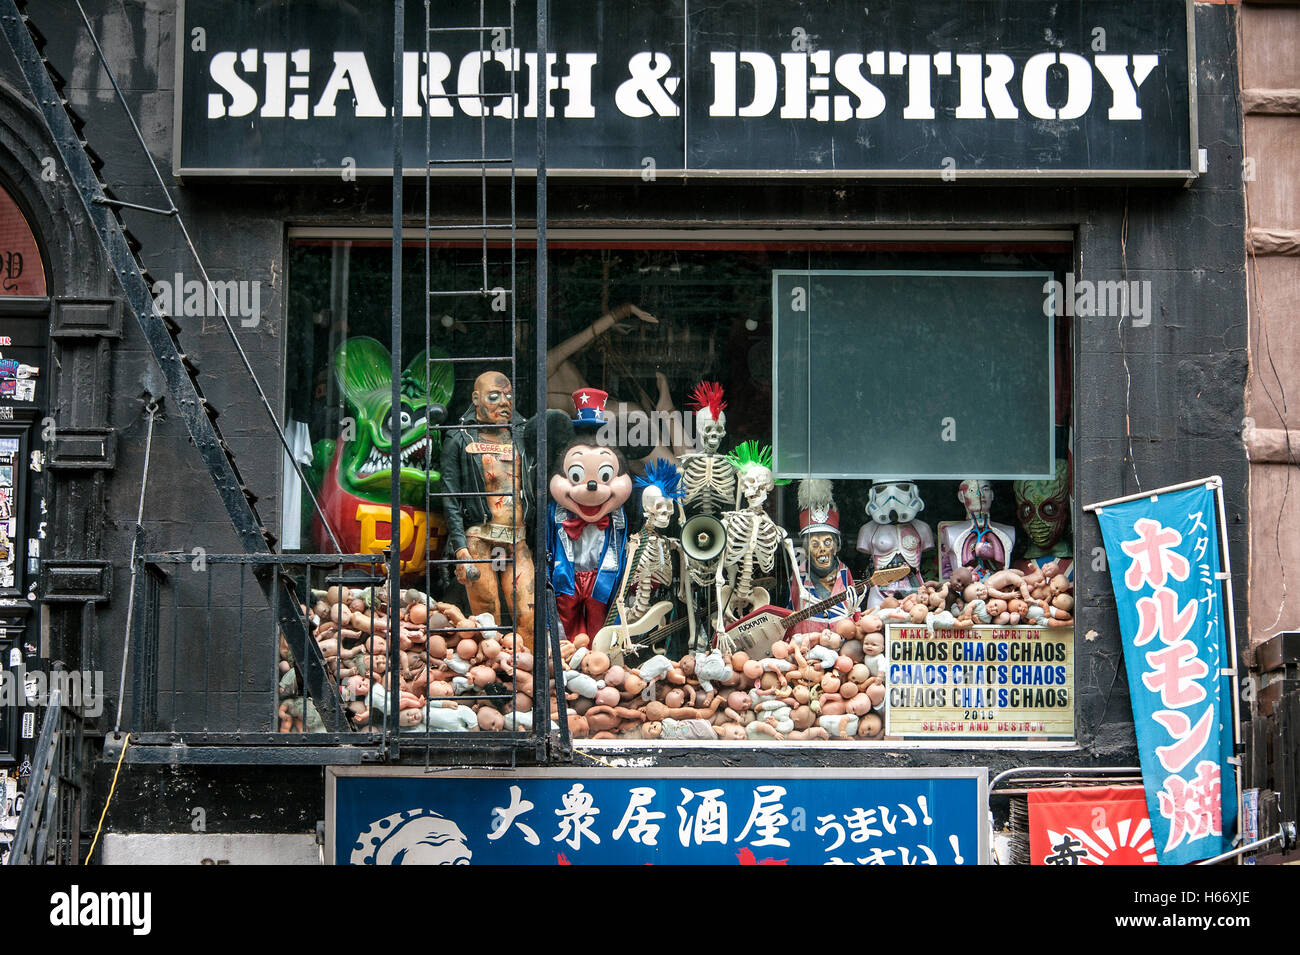 Search & Destroy, second hand store, St. Marks Place, E 8th Street, East Village, Manhattan, New York City Stock Photo